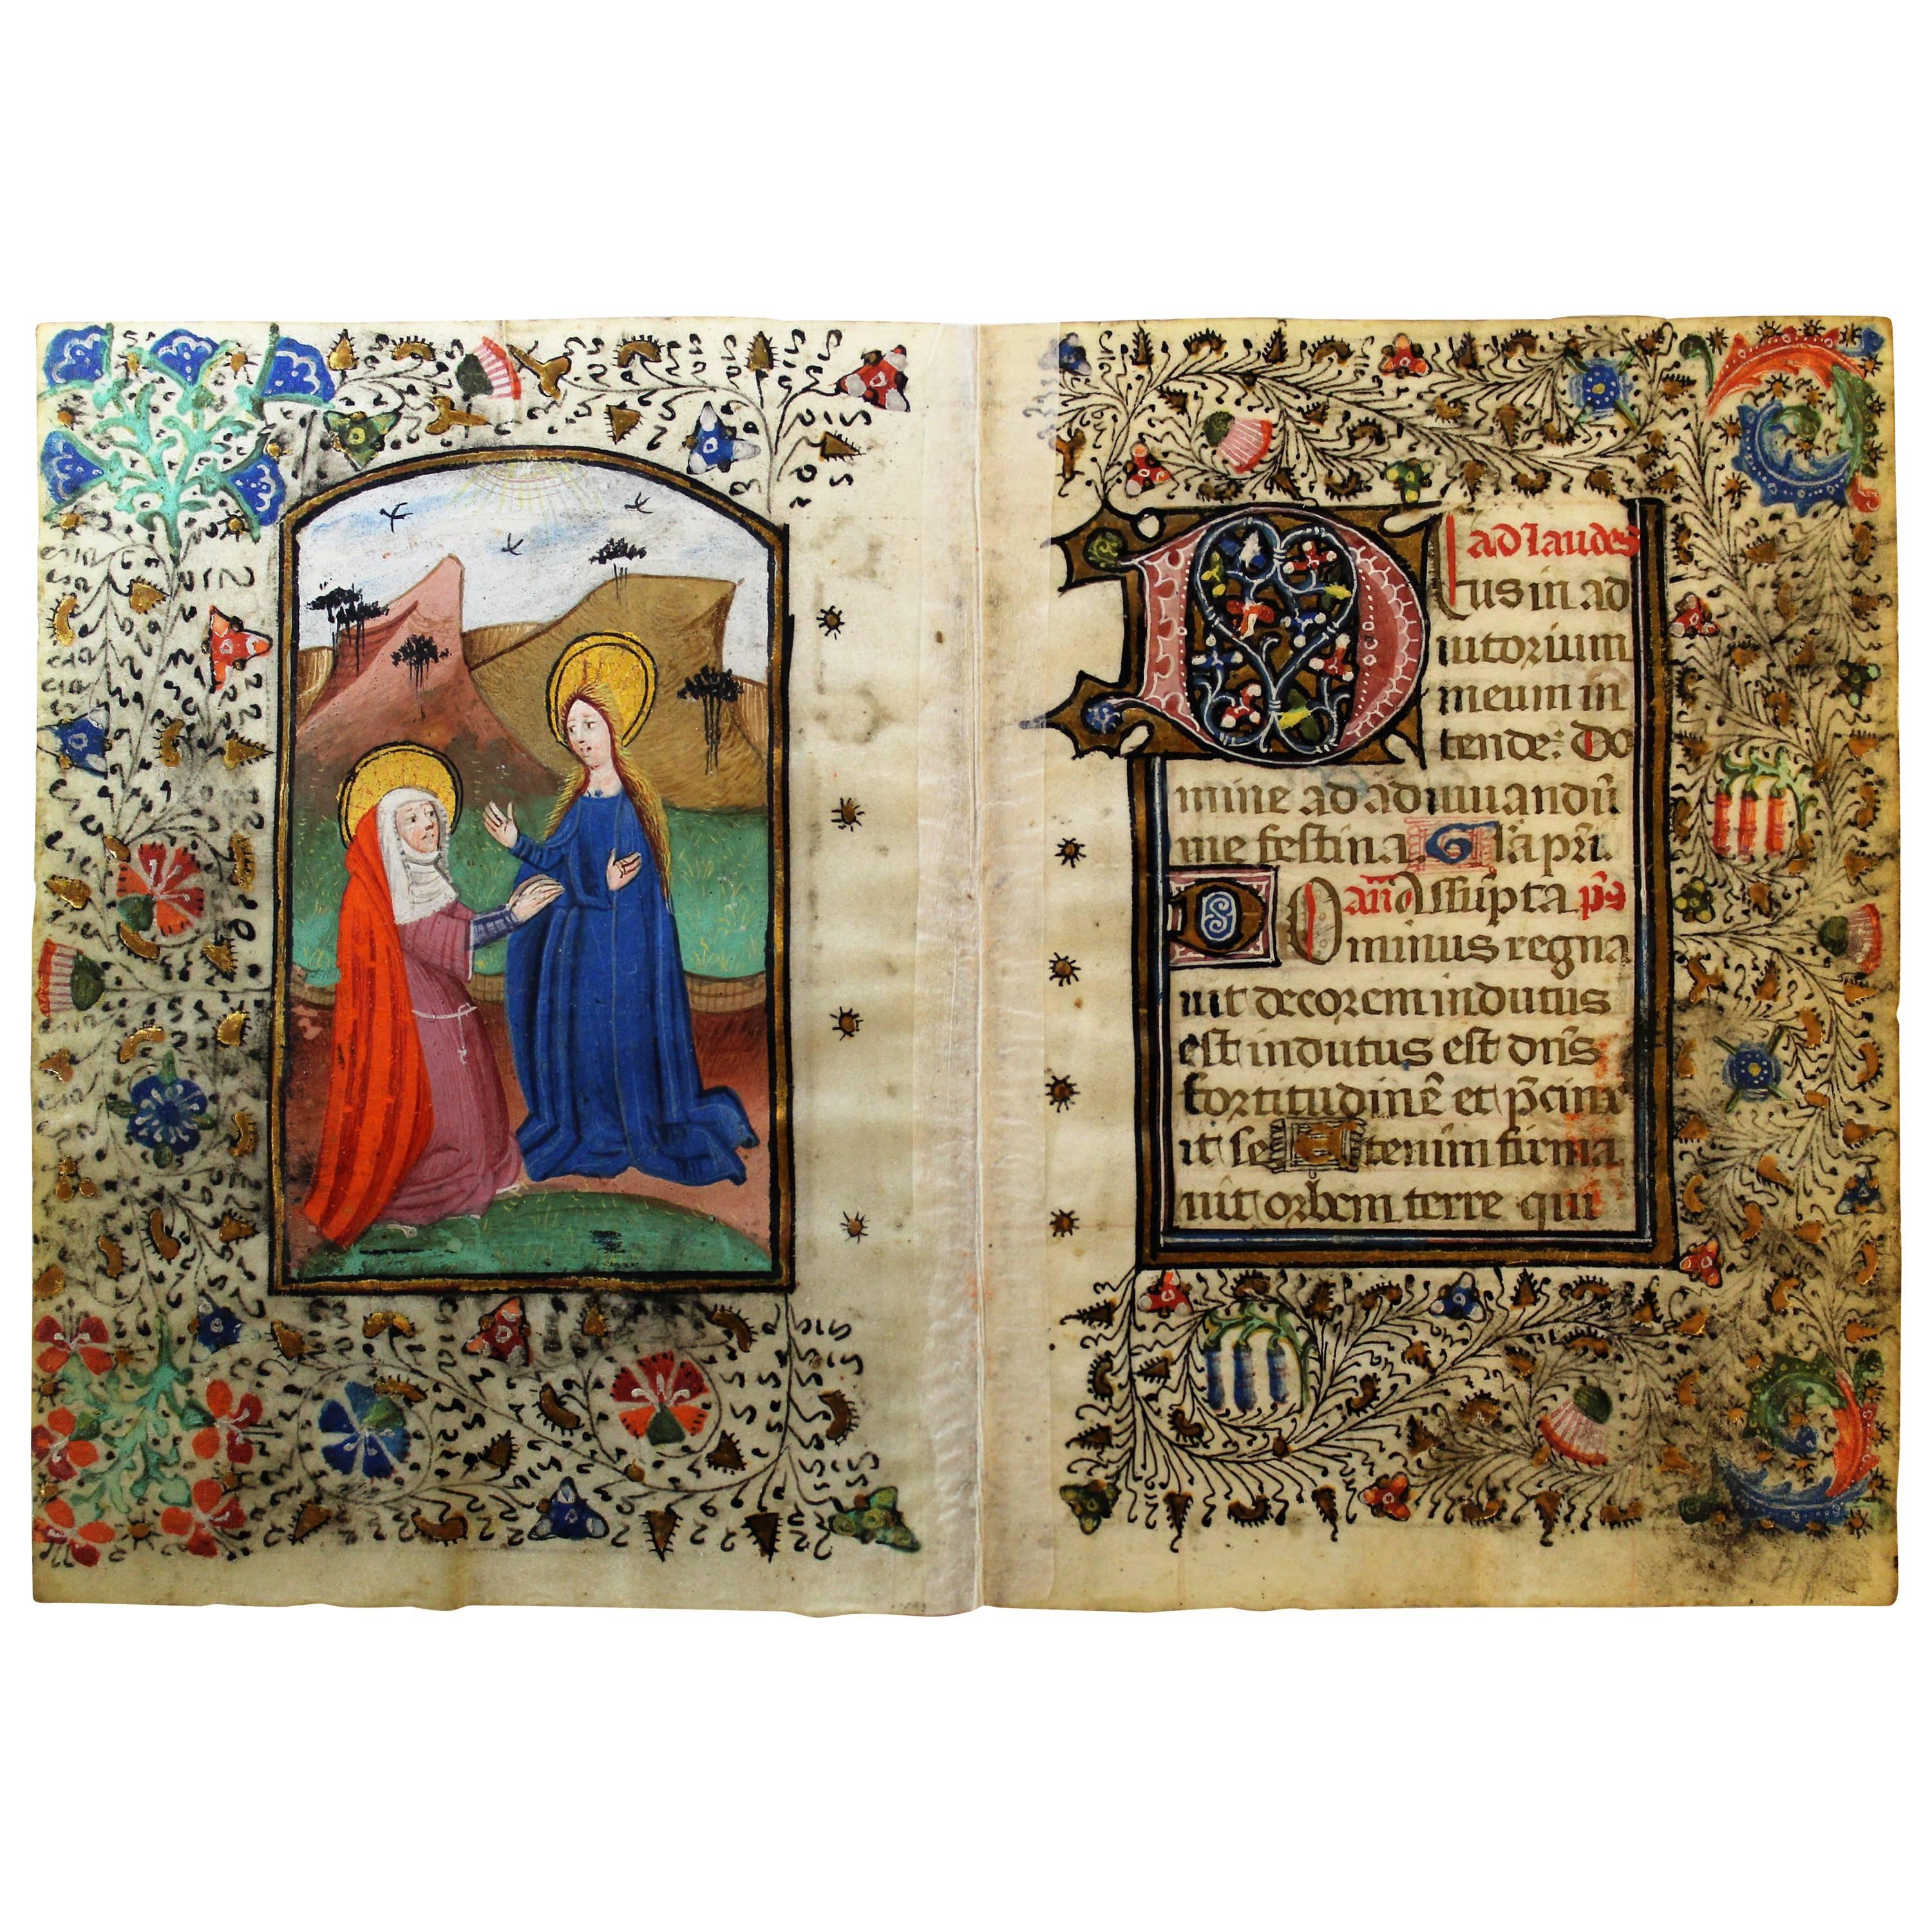 Medieval Illuminated Manuscript and Miniature Painting from the Book of Hours